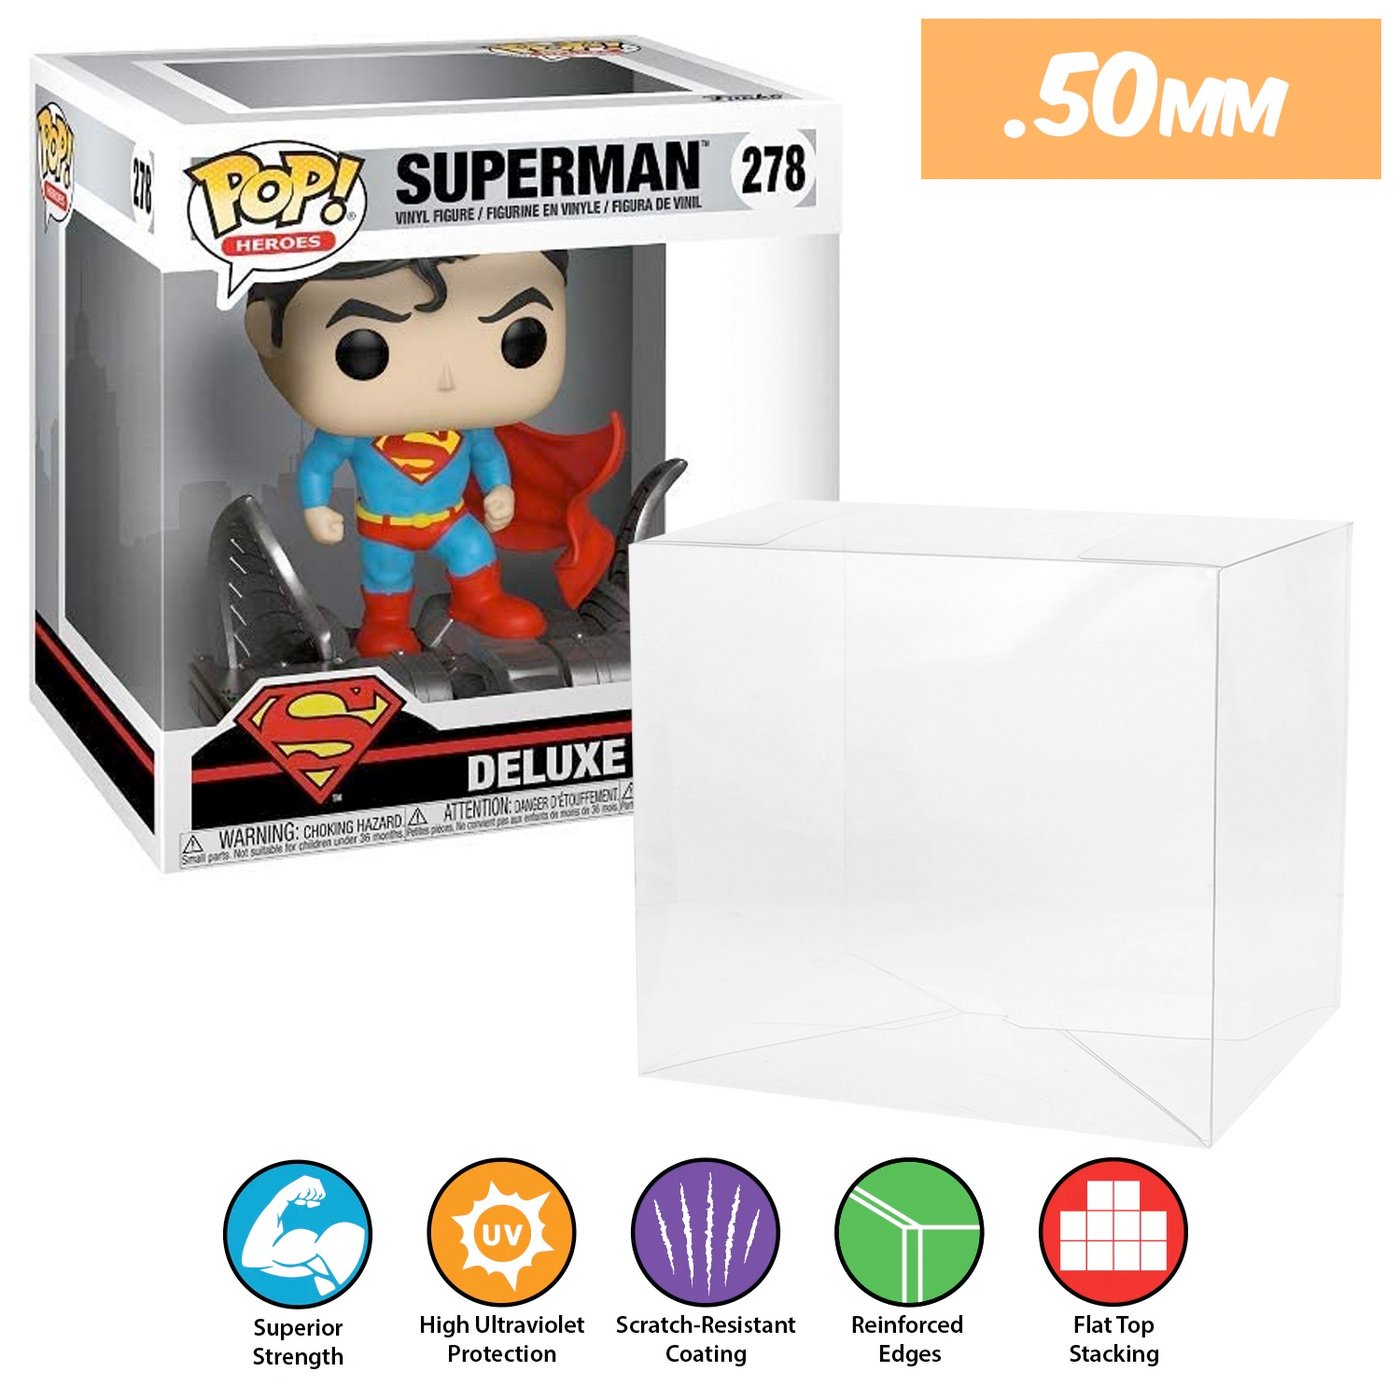 dc jim lee superman hush pop deluxe best funko pop protectors thick strong uv scratch flat top stack vinyl display geek plastic shield vaulted eco armor fits collect protect display case kollector protector